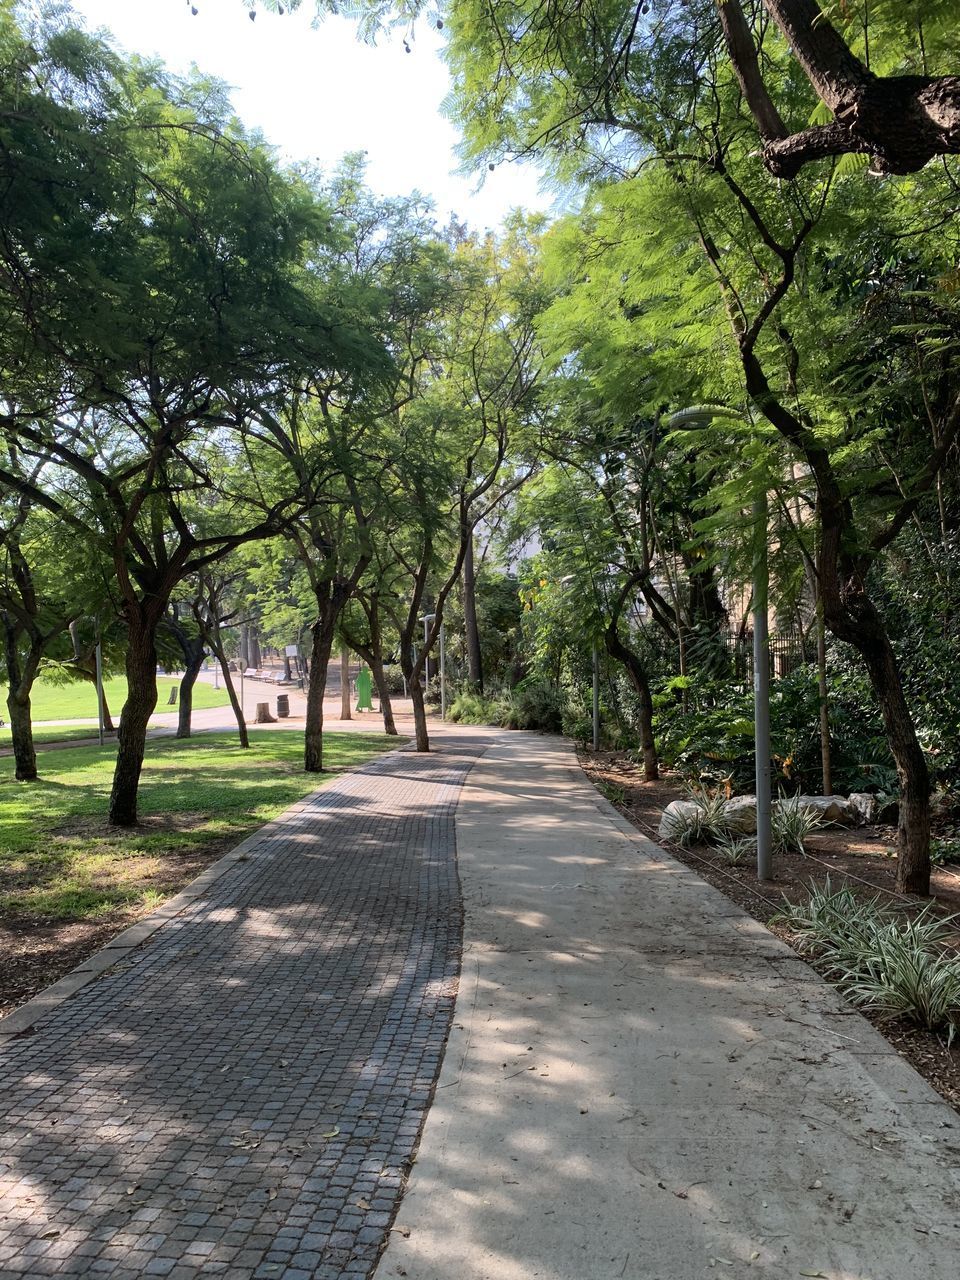 FOOTPATH AMIDST TREES IN PARK